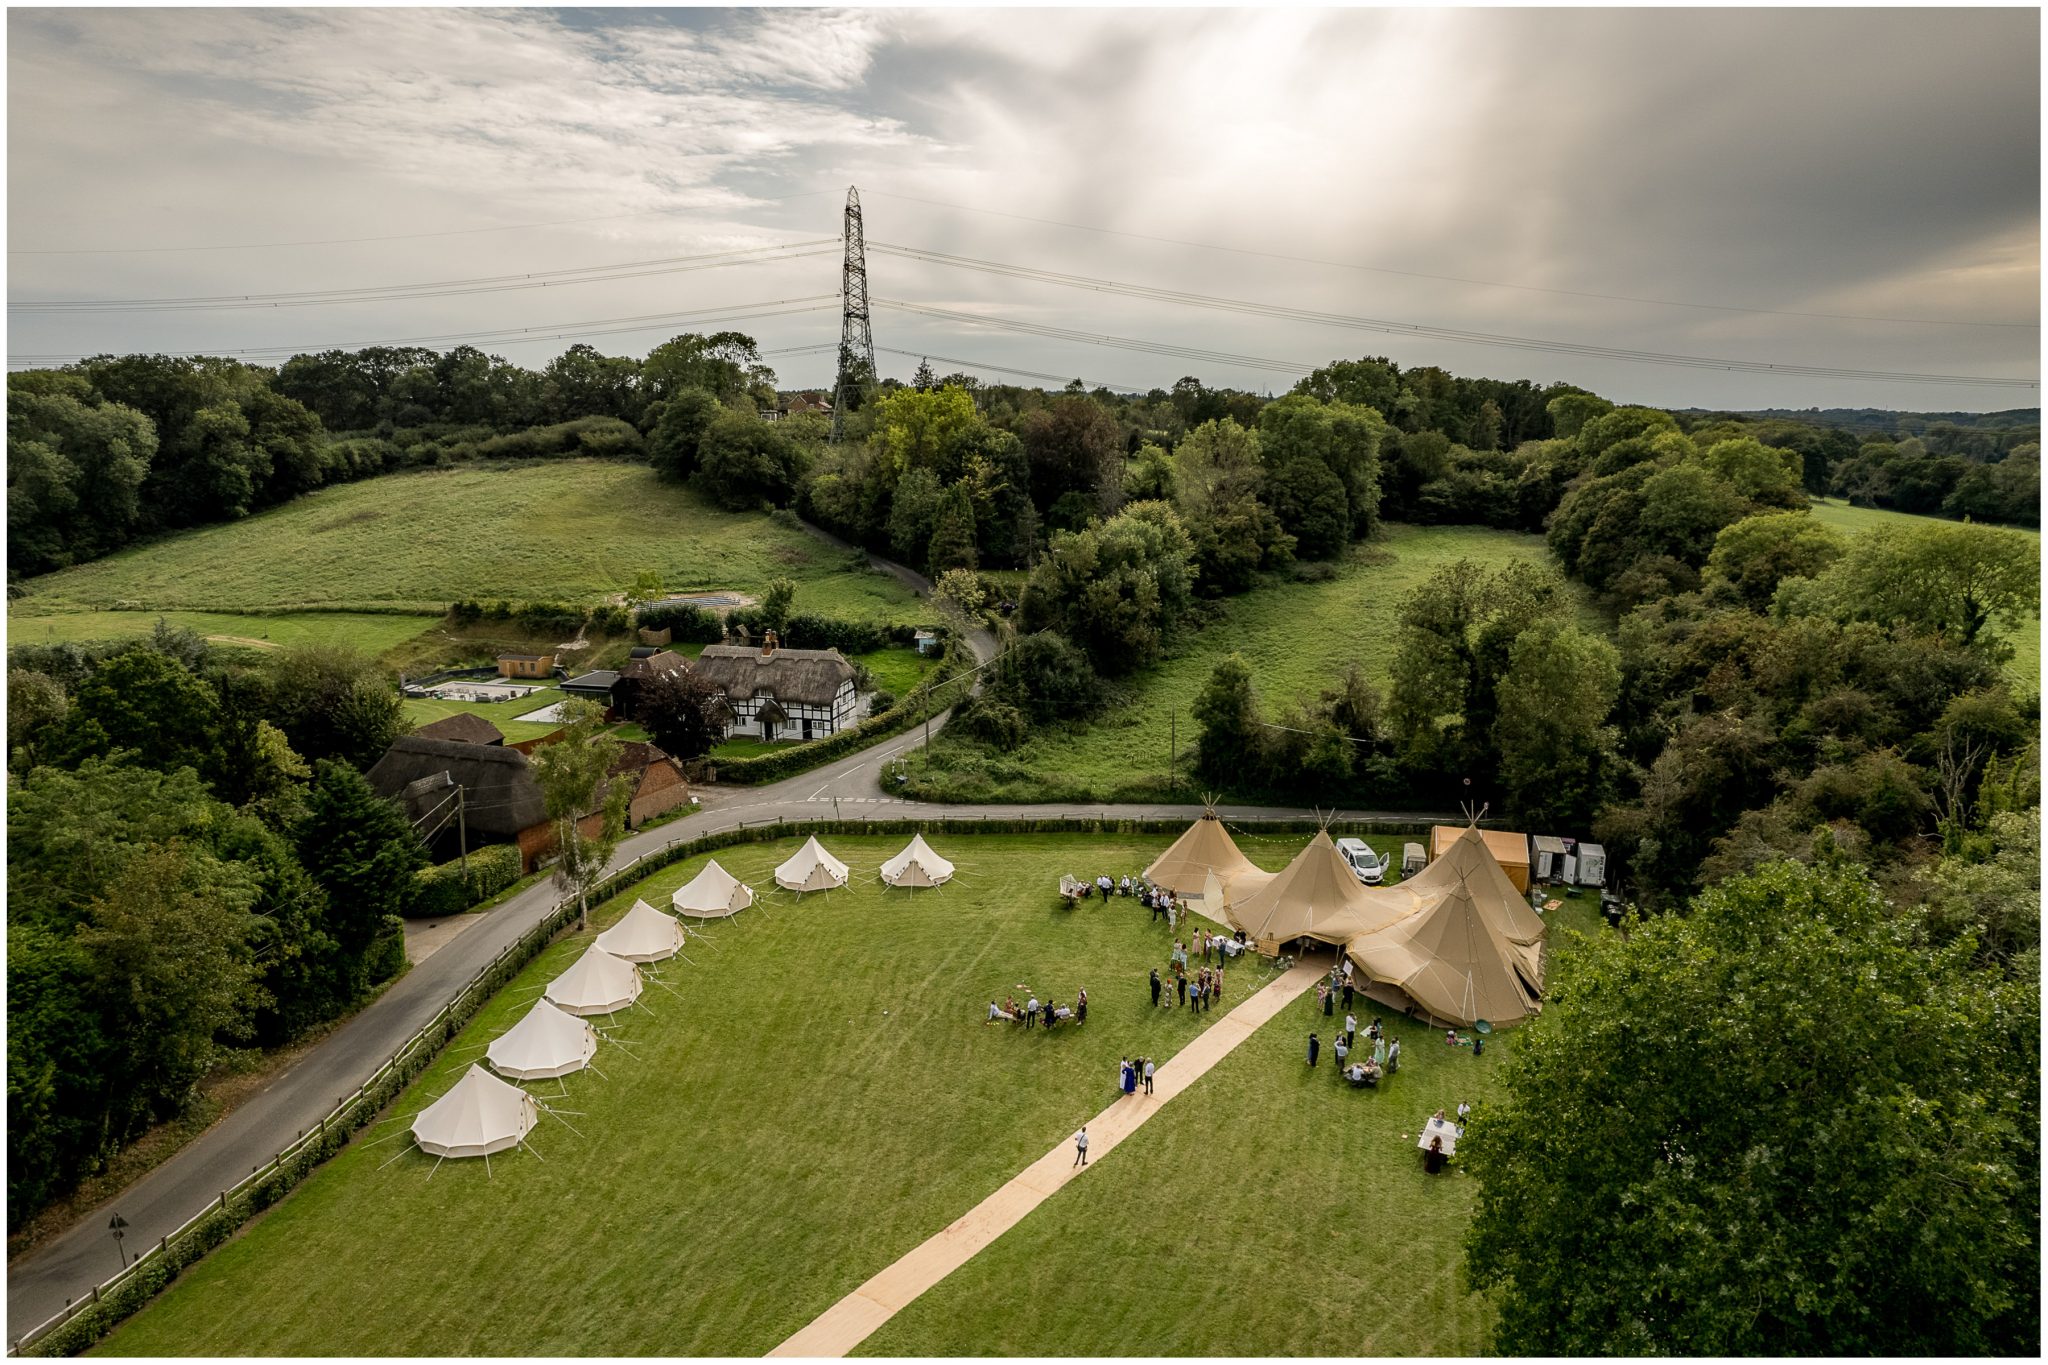 Drone image of the wedding reception with tipi marquee and lamping pod bell tents